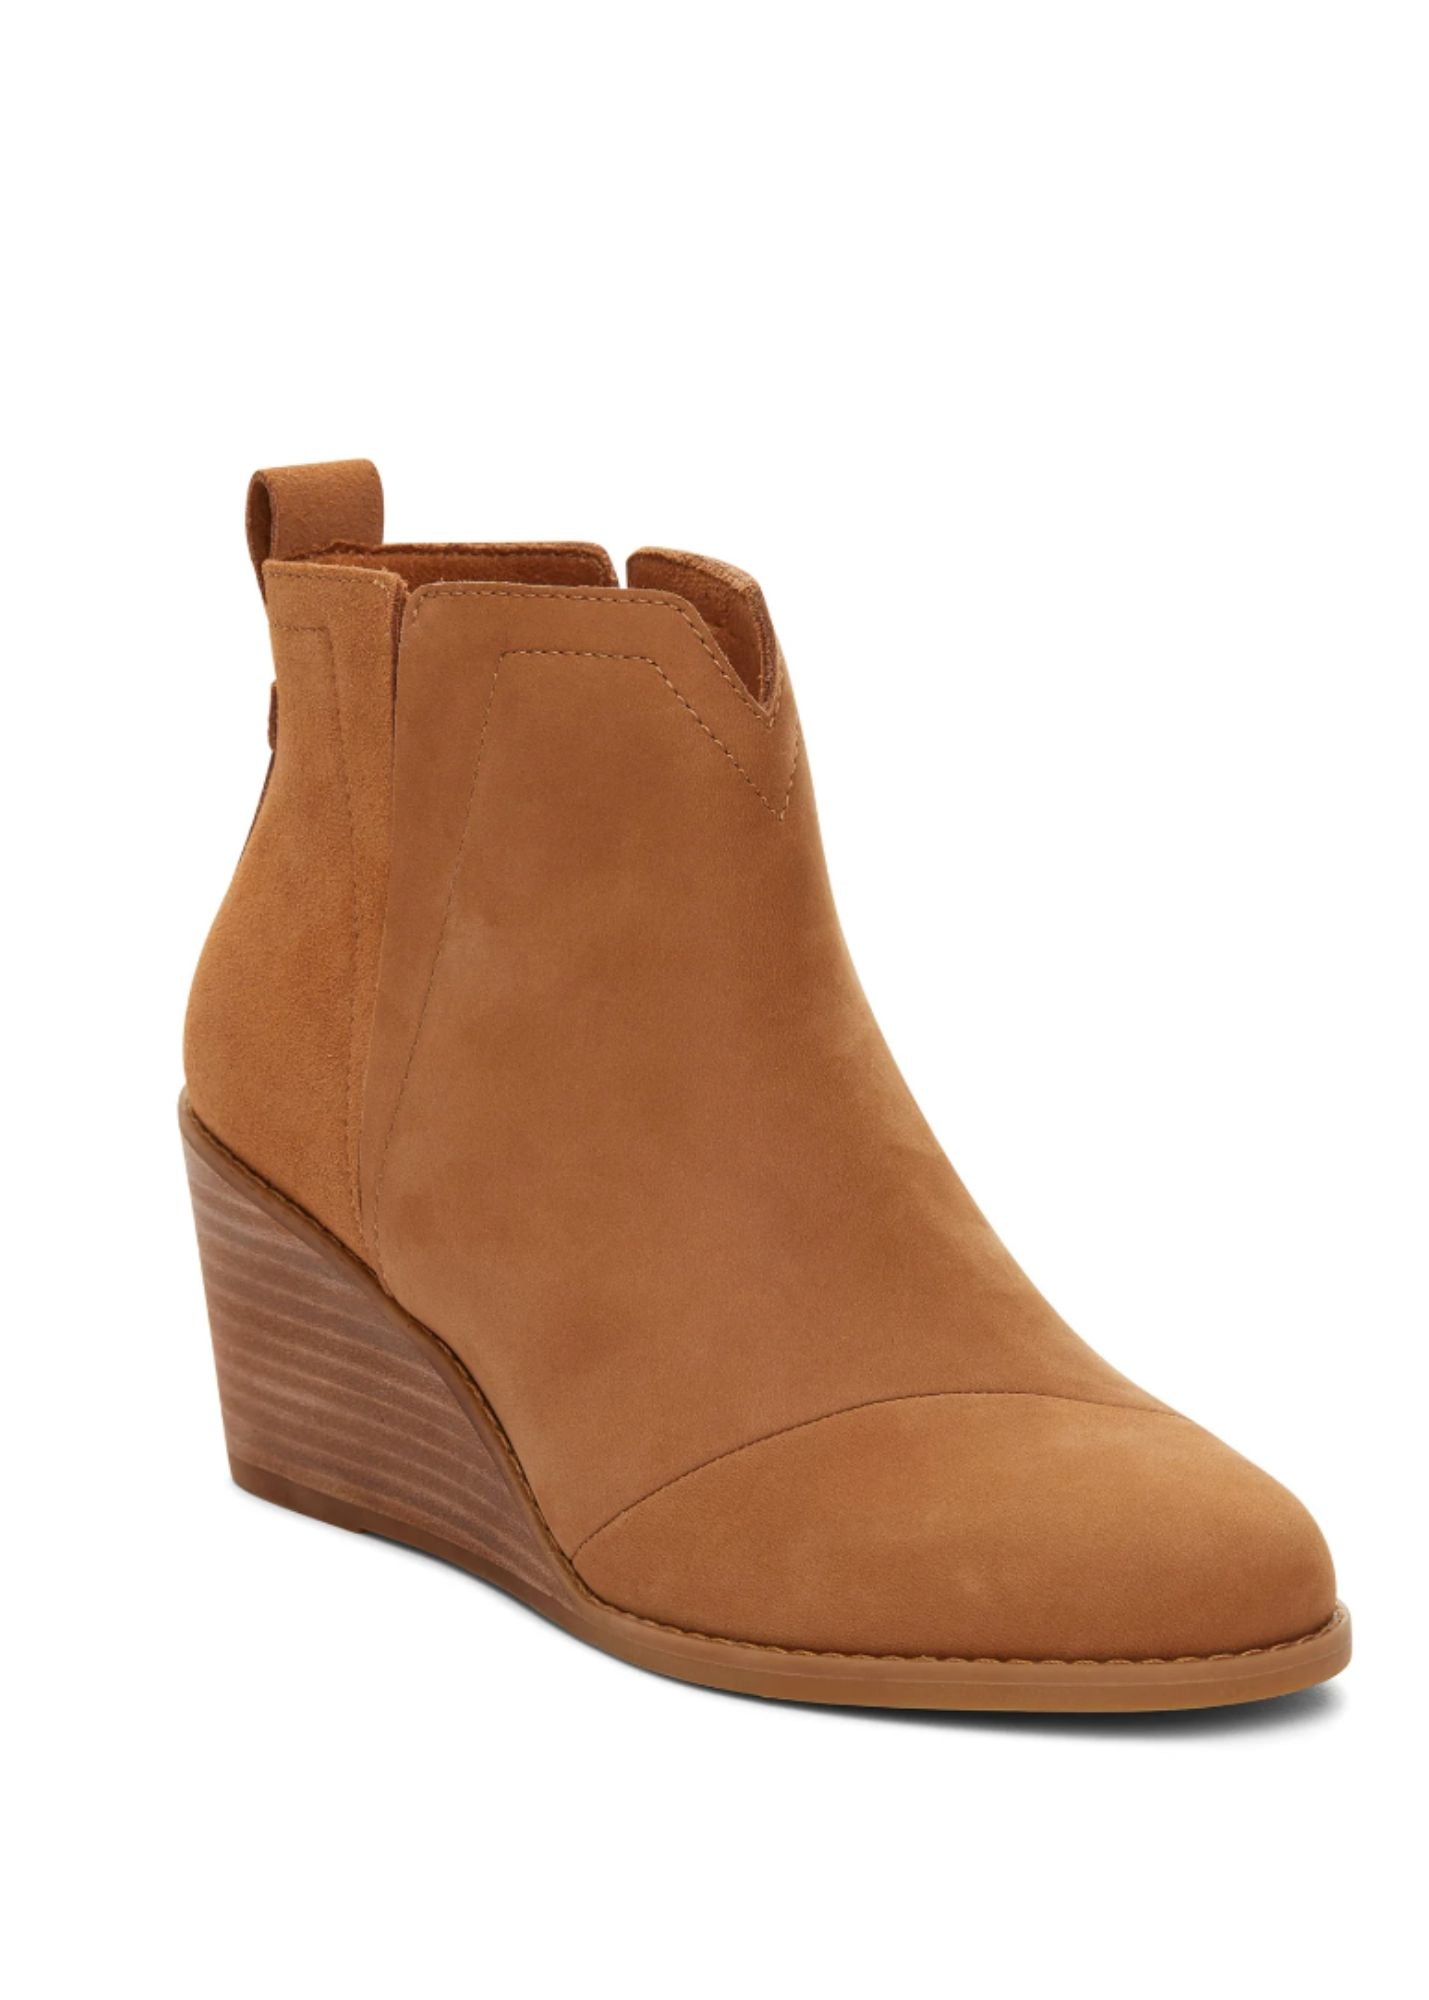 TOMS®  Clare Wedge Bootie Shoes